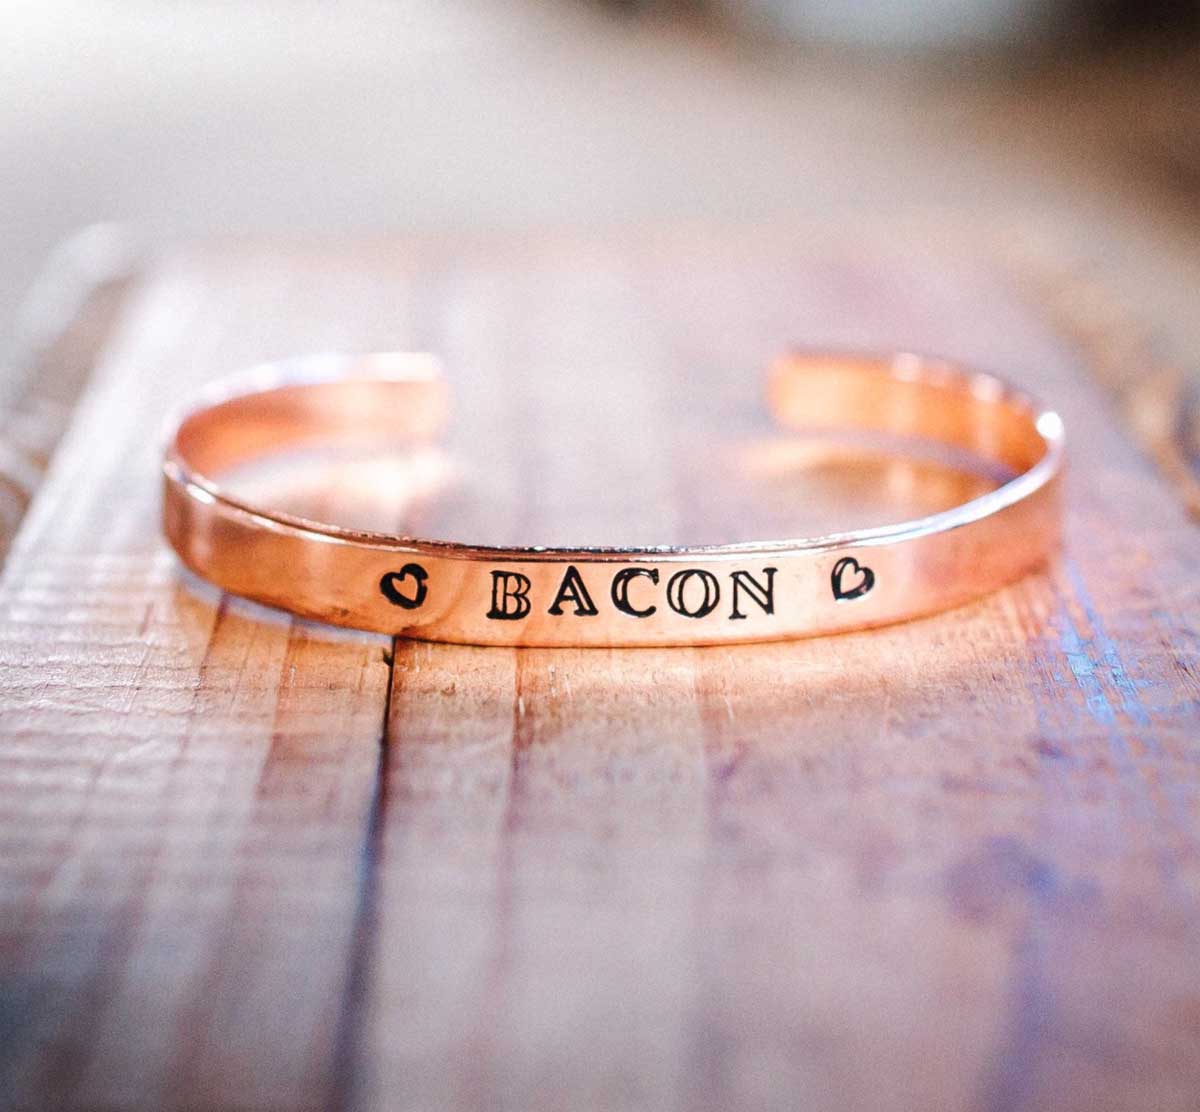 A copper bracelet with the word "BACON" hand stamped across the front.